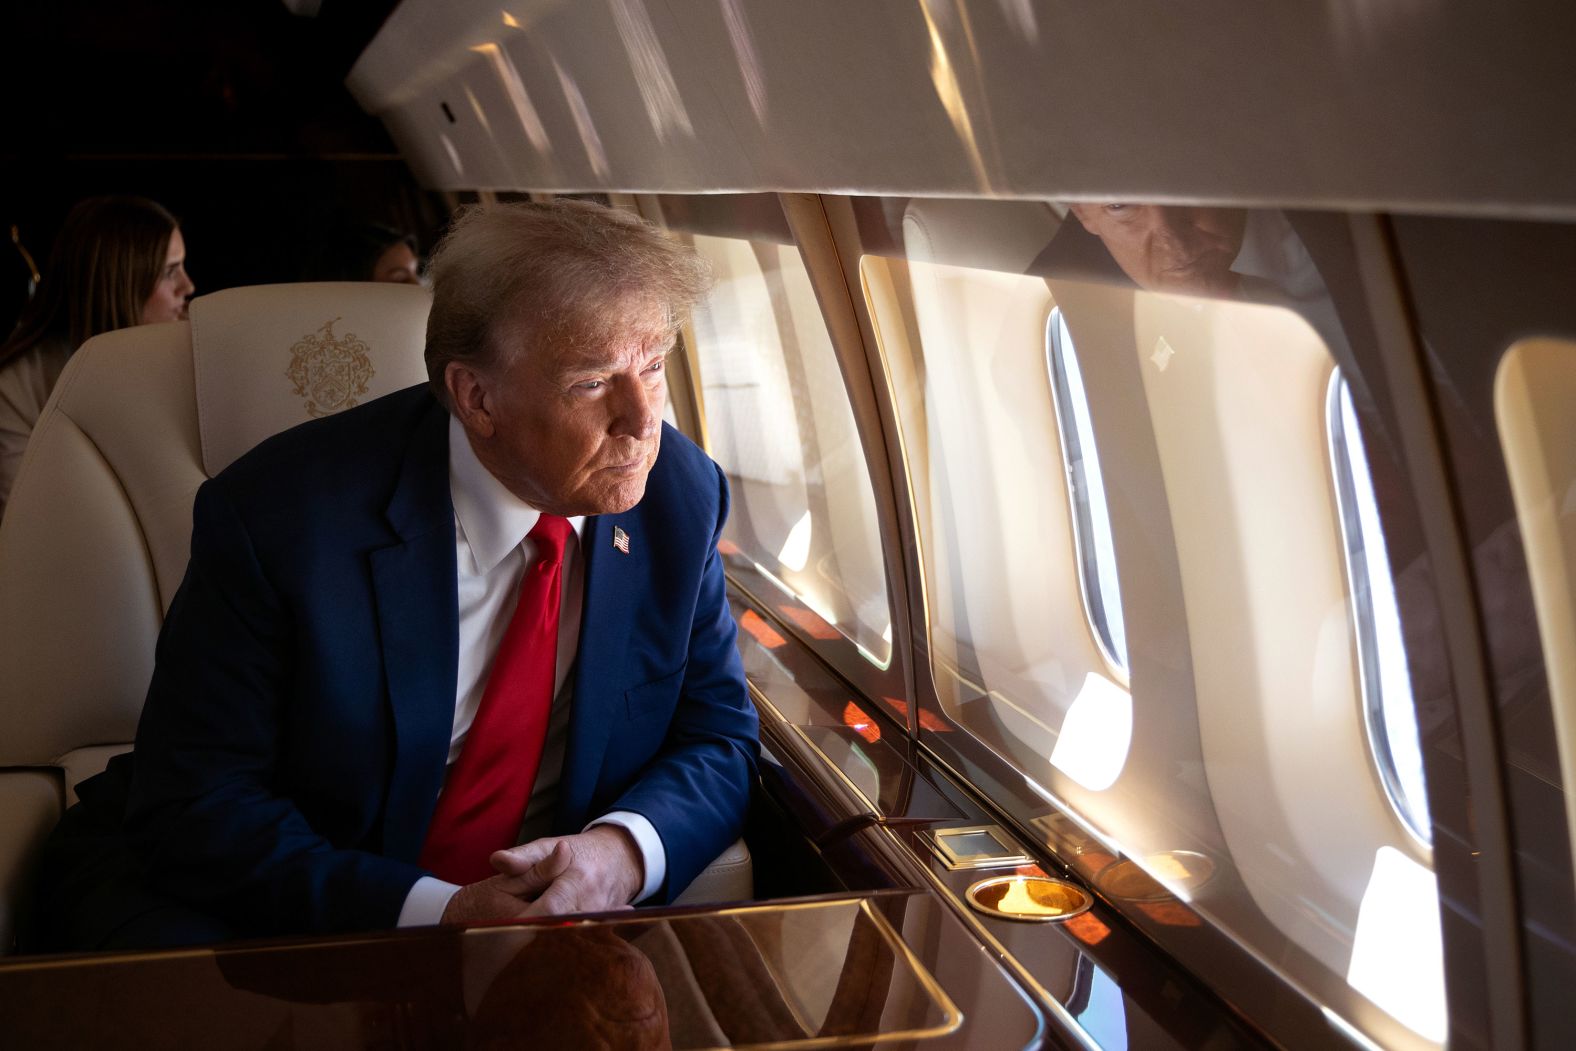 Former US President Donald Trump looks out at people on the beach as he flies to a rally in Wildwood, New Jersey, on Saturday, May 11. <a href="index.php?page=&url=https%3A%2F%2Fwww.cnn.com%2F2024%2F05%2F11%2Fpolitics%2Ftrump-rally-new-jersey%2Findex.html" target="_blank">Trump held a beachfront rally on the Jersey Shore</a>, returning to the campaign trail after an <a href="index.php?page=&url=https%3A%2F%2Fwww.cnn.com%2F2024%2F05%2F07%2Fpolitics%2Ftakeaways-stormy-daniels-hush-money-testimony%2Findex.html" target="_blank">explosive week of testimony</a> in his hush money trial in New York.